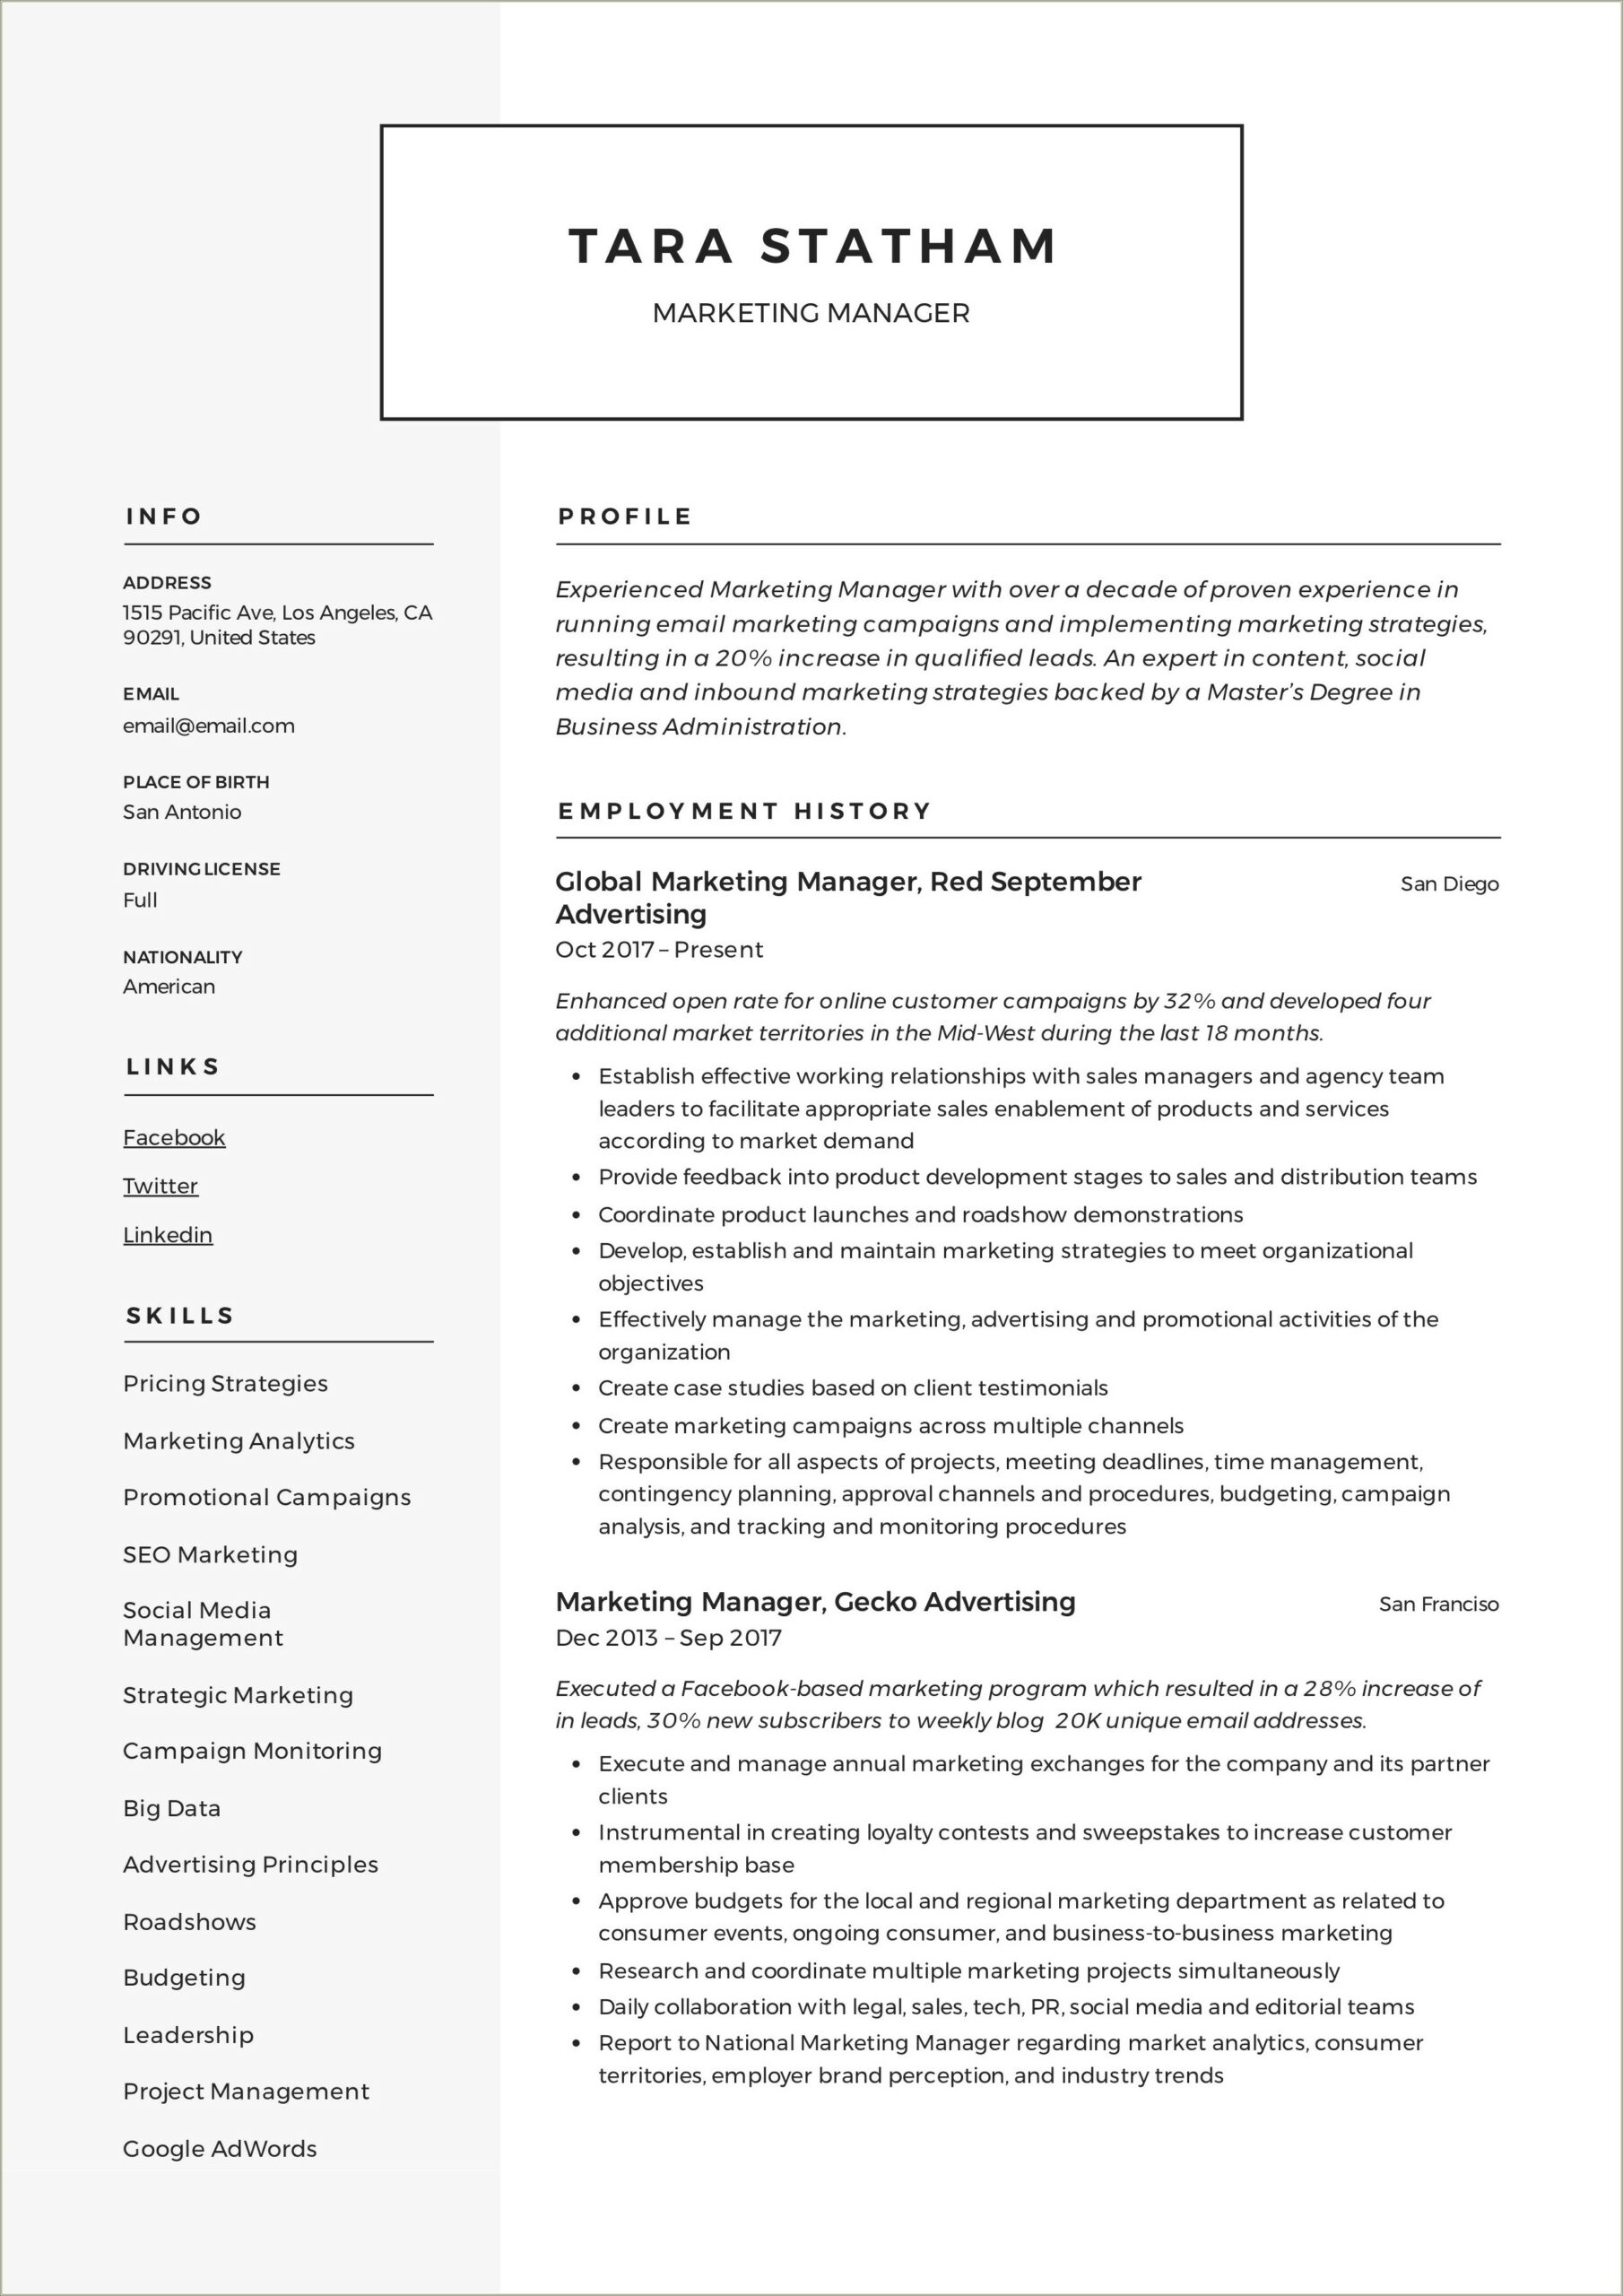 Free Resume Templates For Marketing Positions